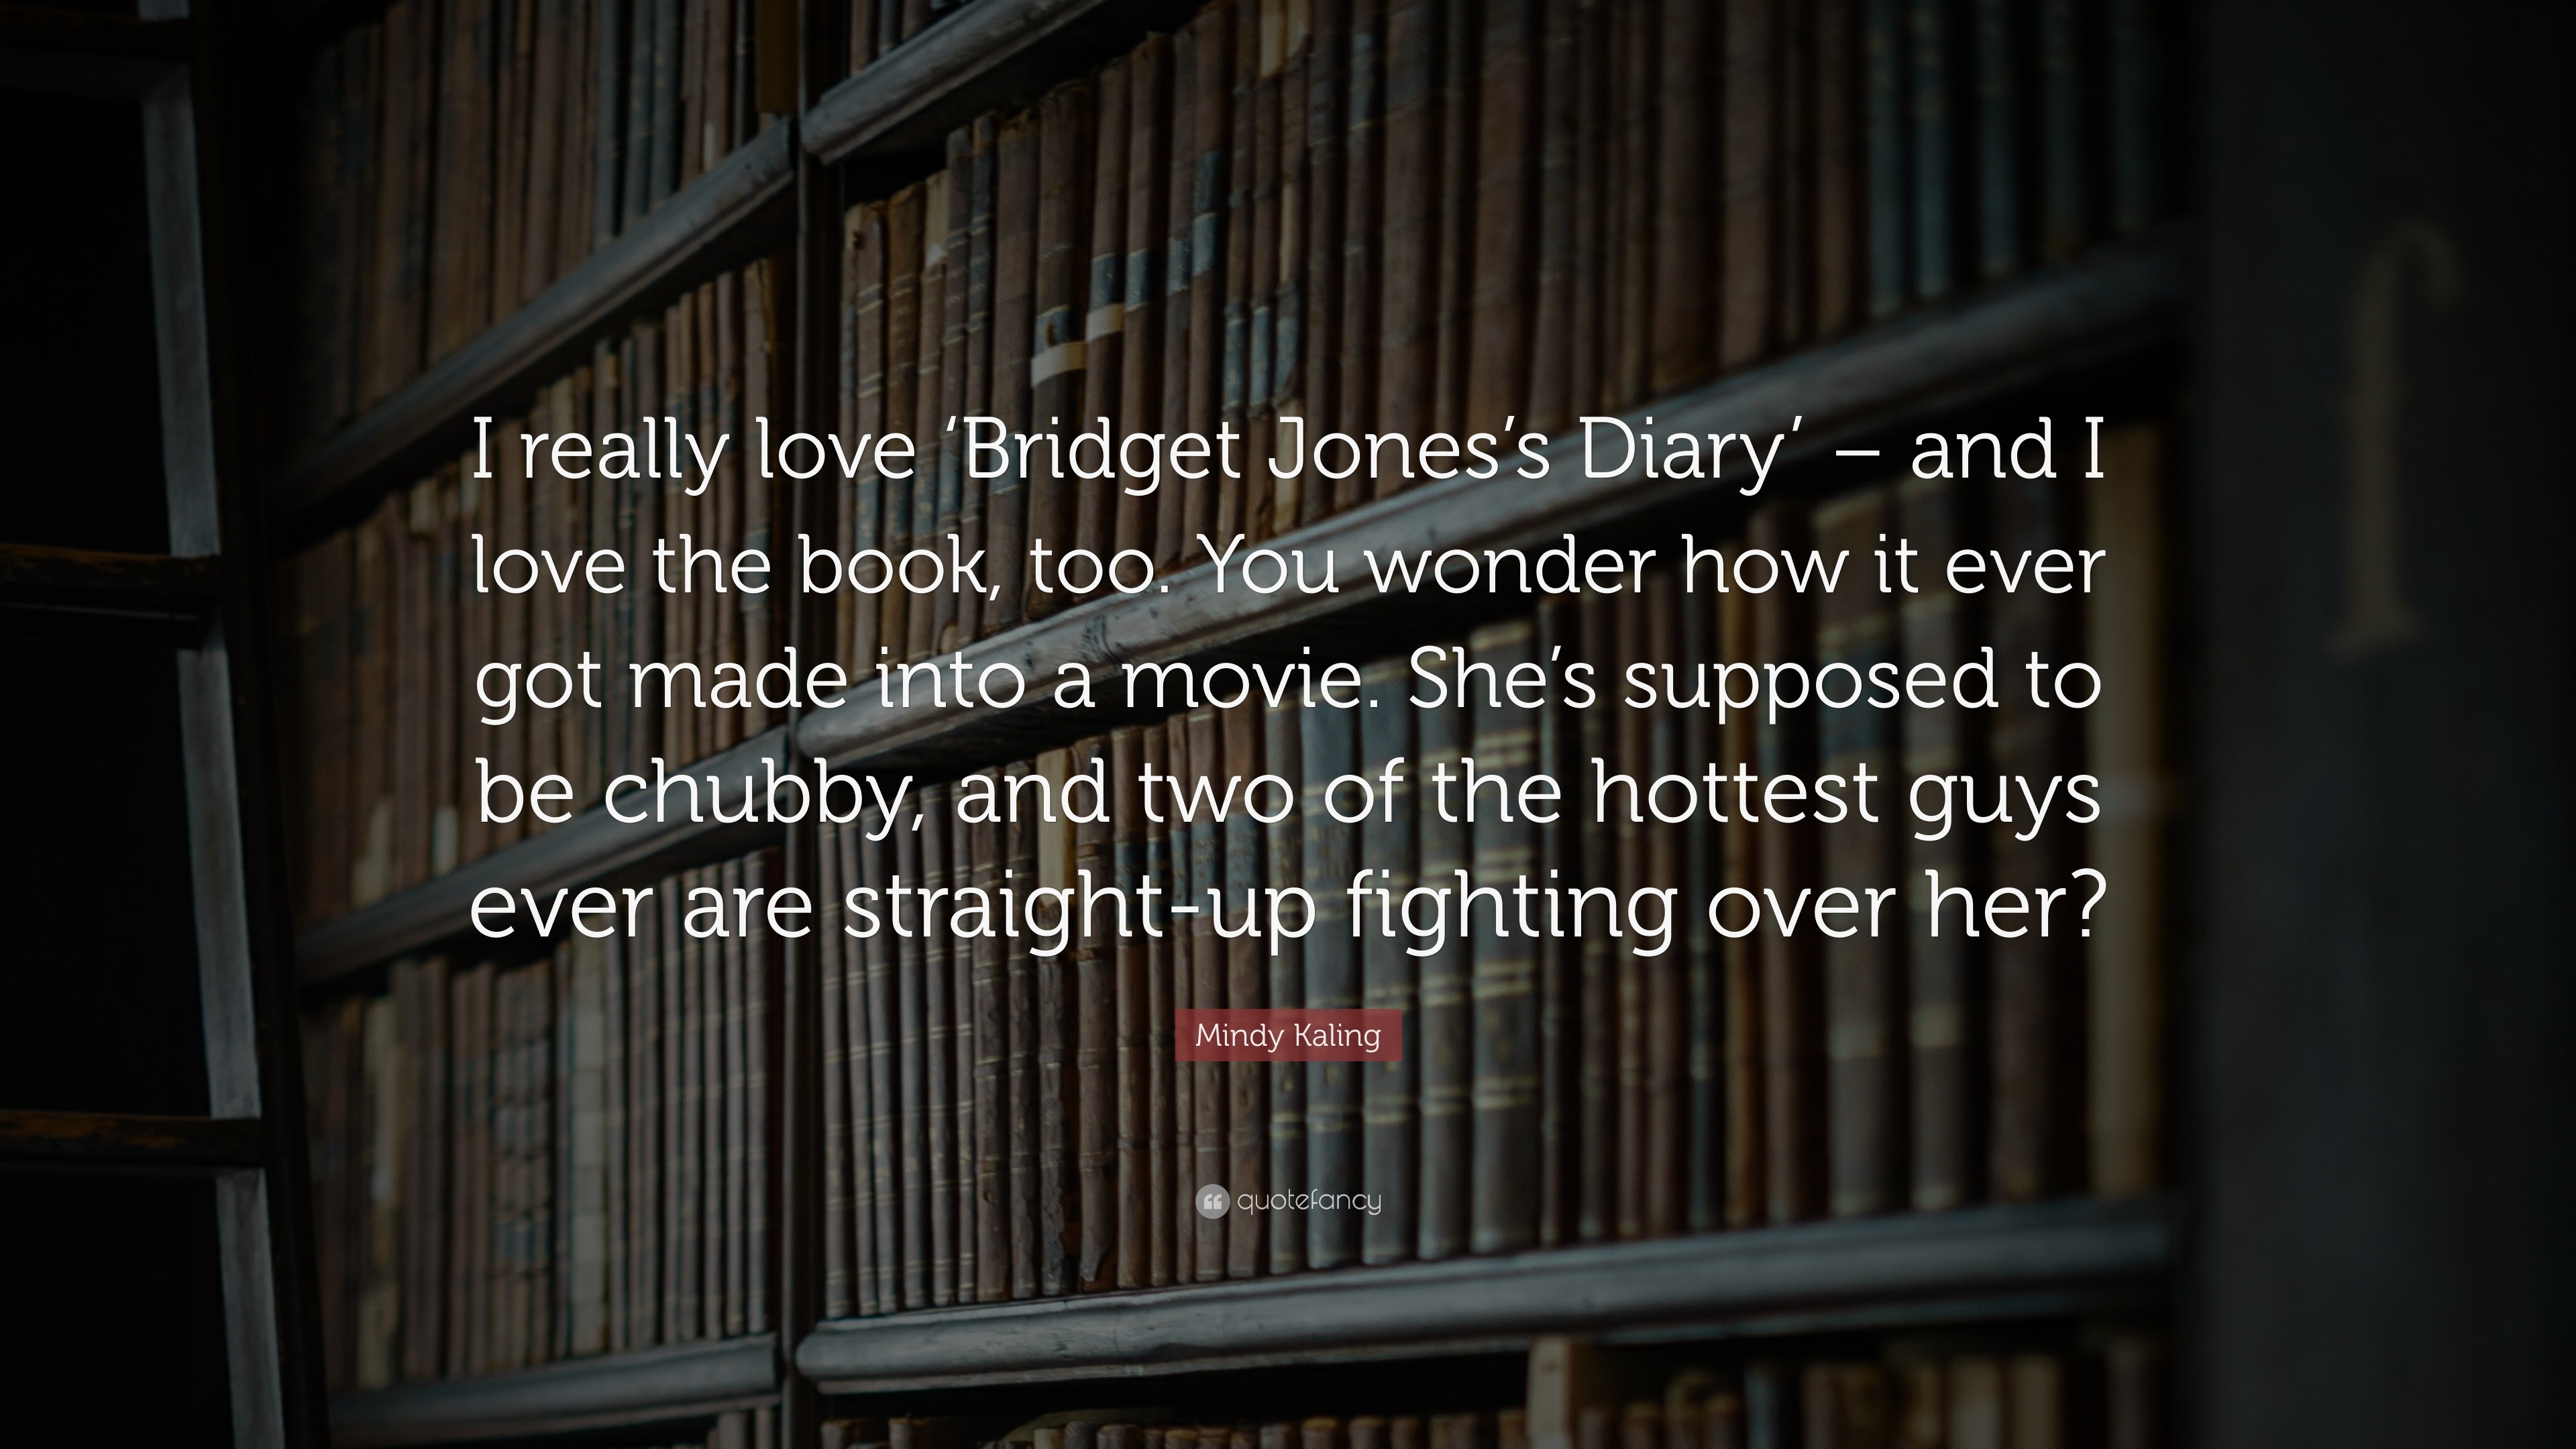 Mindy Kaling Quote: “I Really Love 'Bridget Jones's Diary' – And I Love The Book, Too. You Wonder How It Ever Got Made Into A Movie. She's Su...”